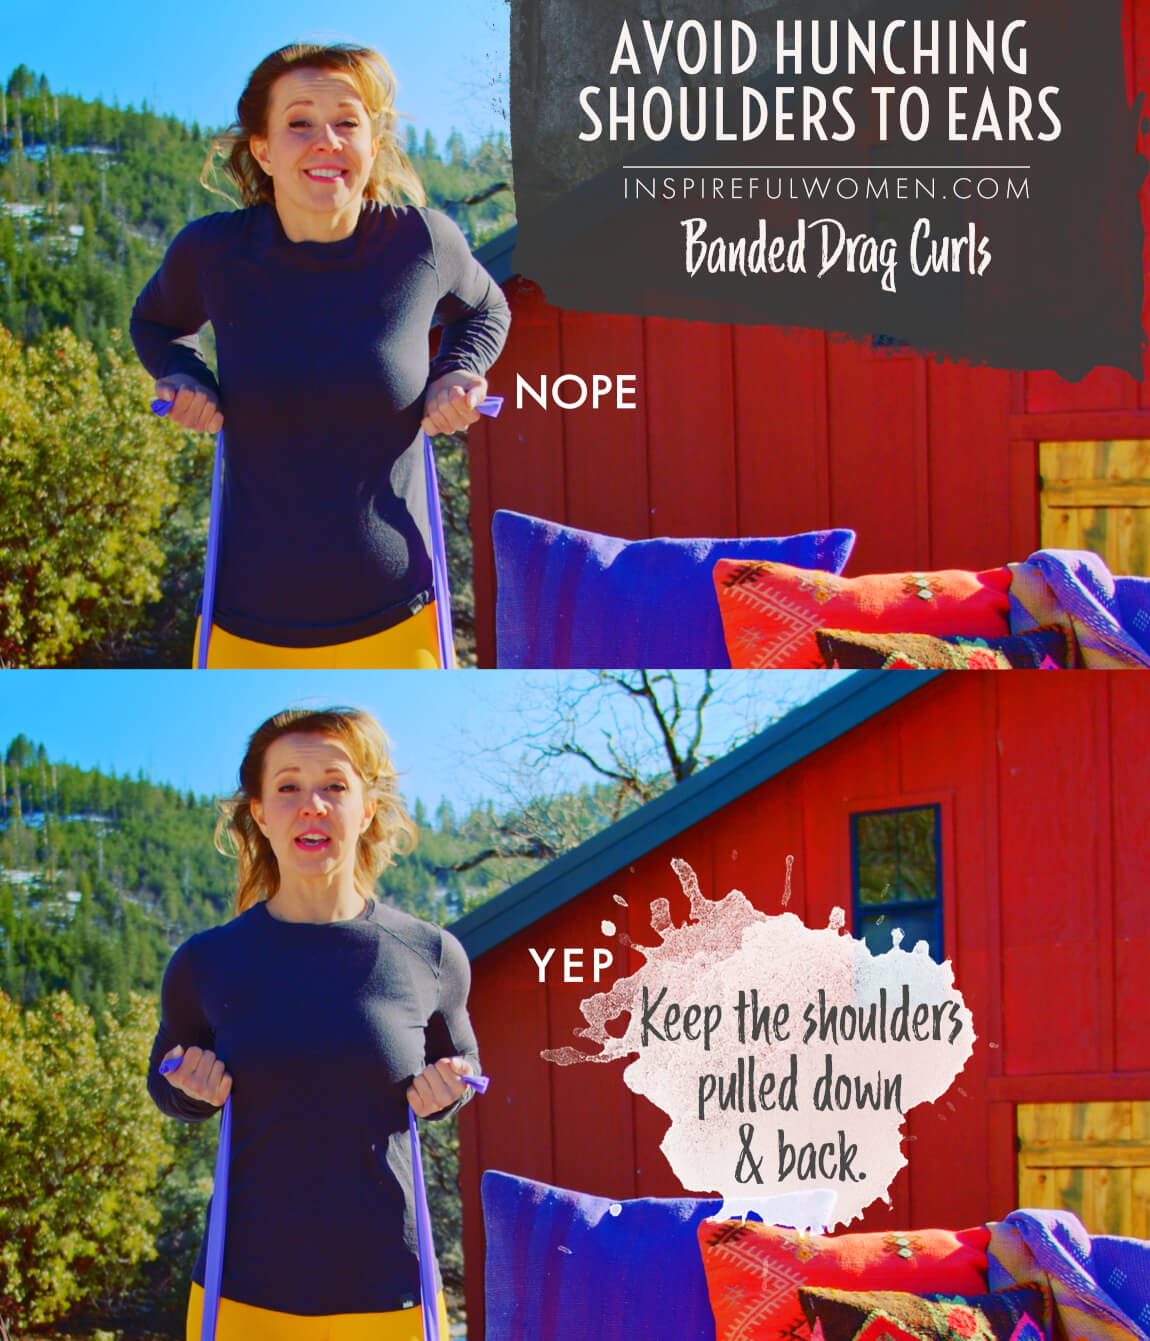 avoid-hunching-shoulders-to-ears-resistance-band-drag-curls-common-mistakes